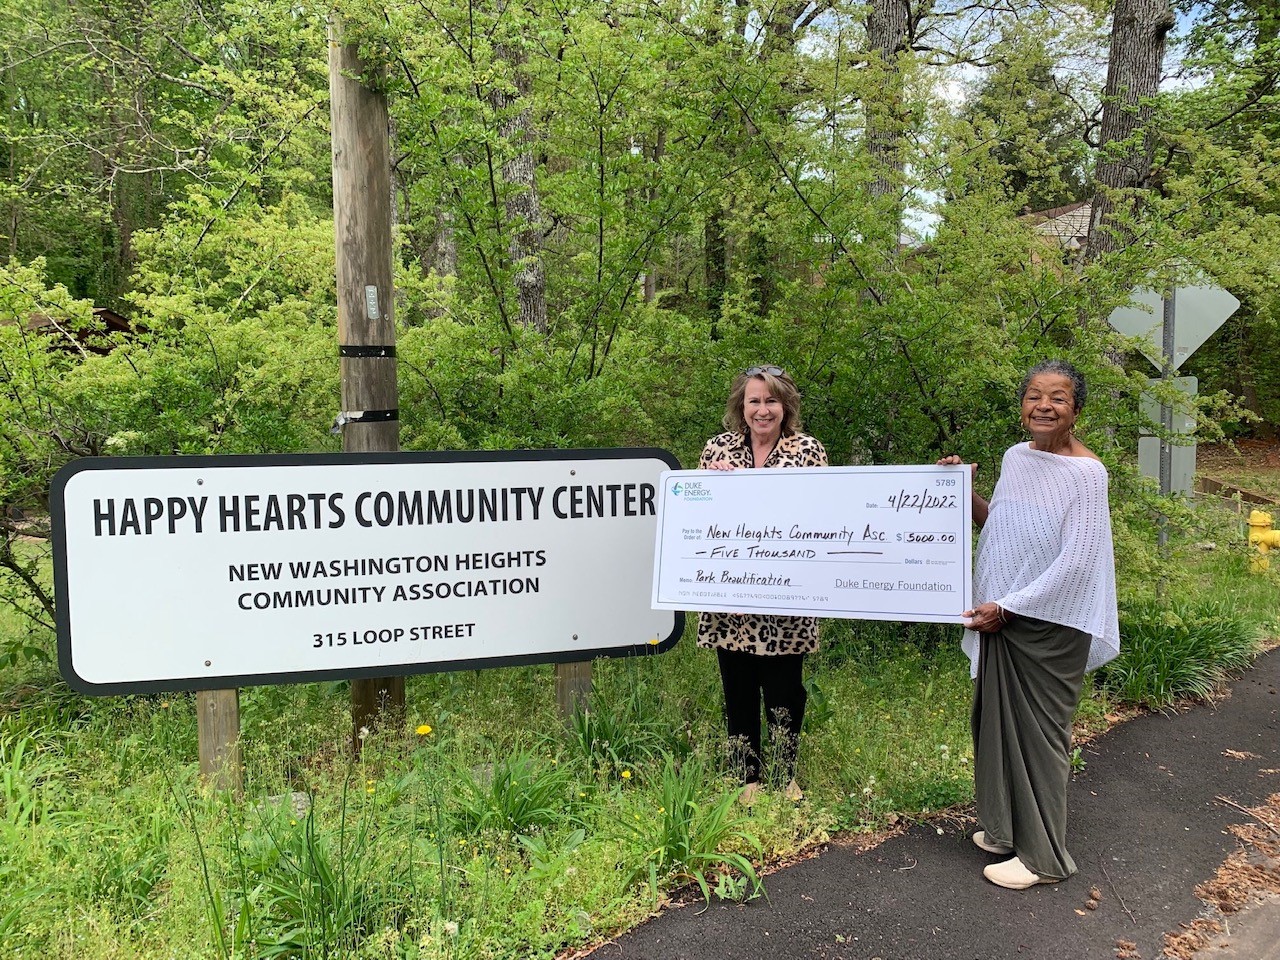 Greenville's New Heights Community Association received $5,000 for the upkeep of the Happy Hearts Community Center. (Photo/Provided)